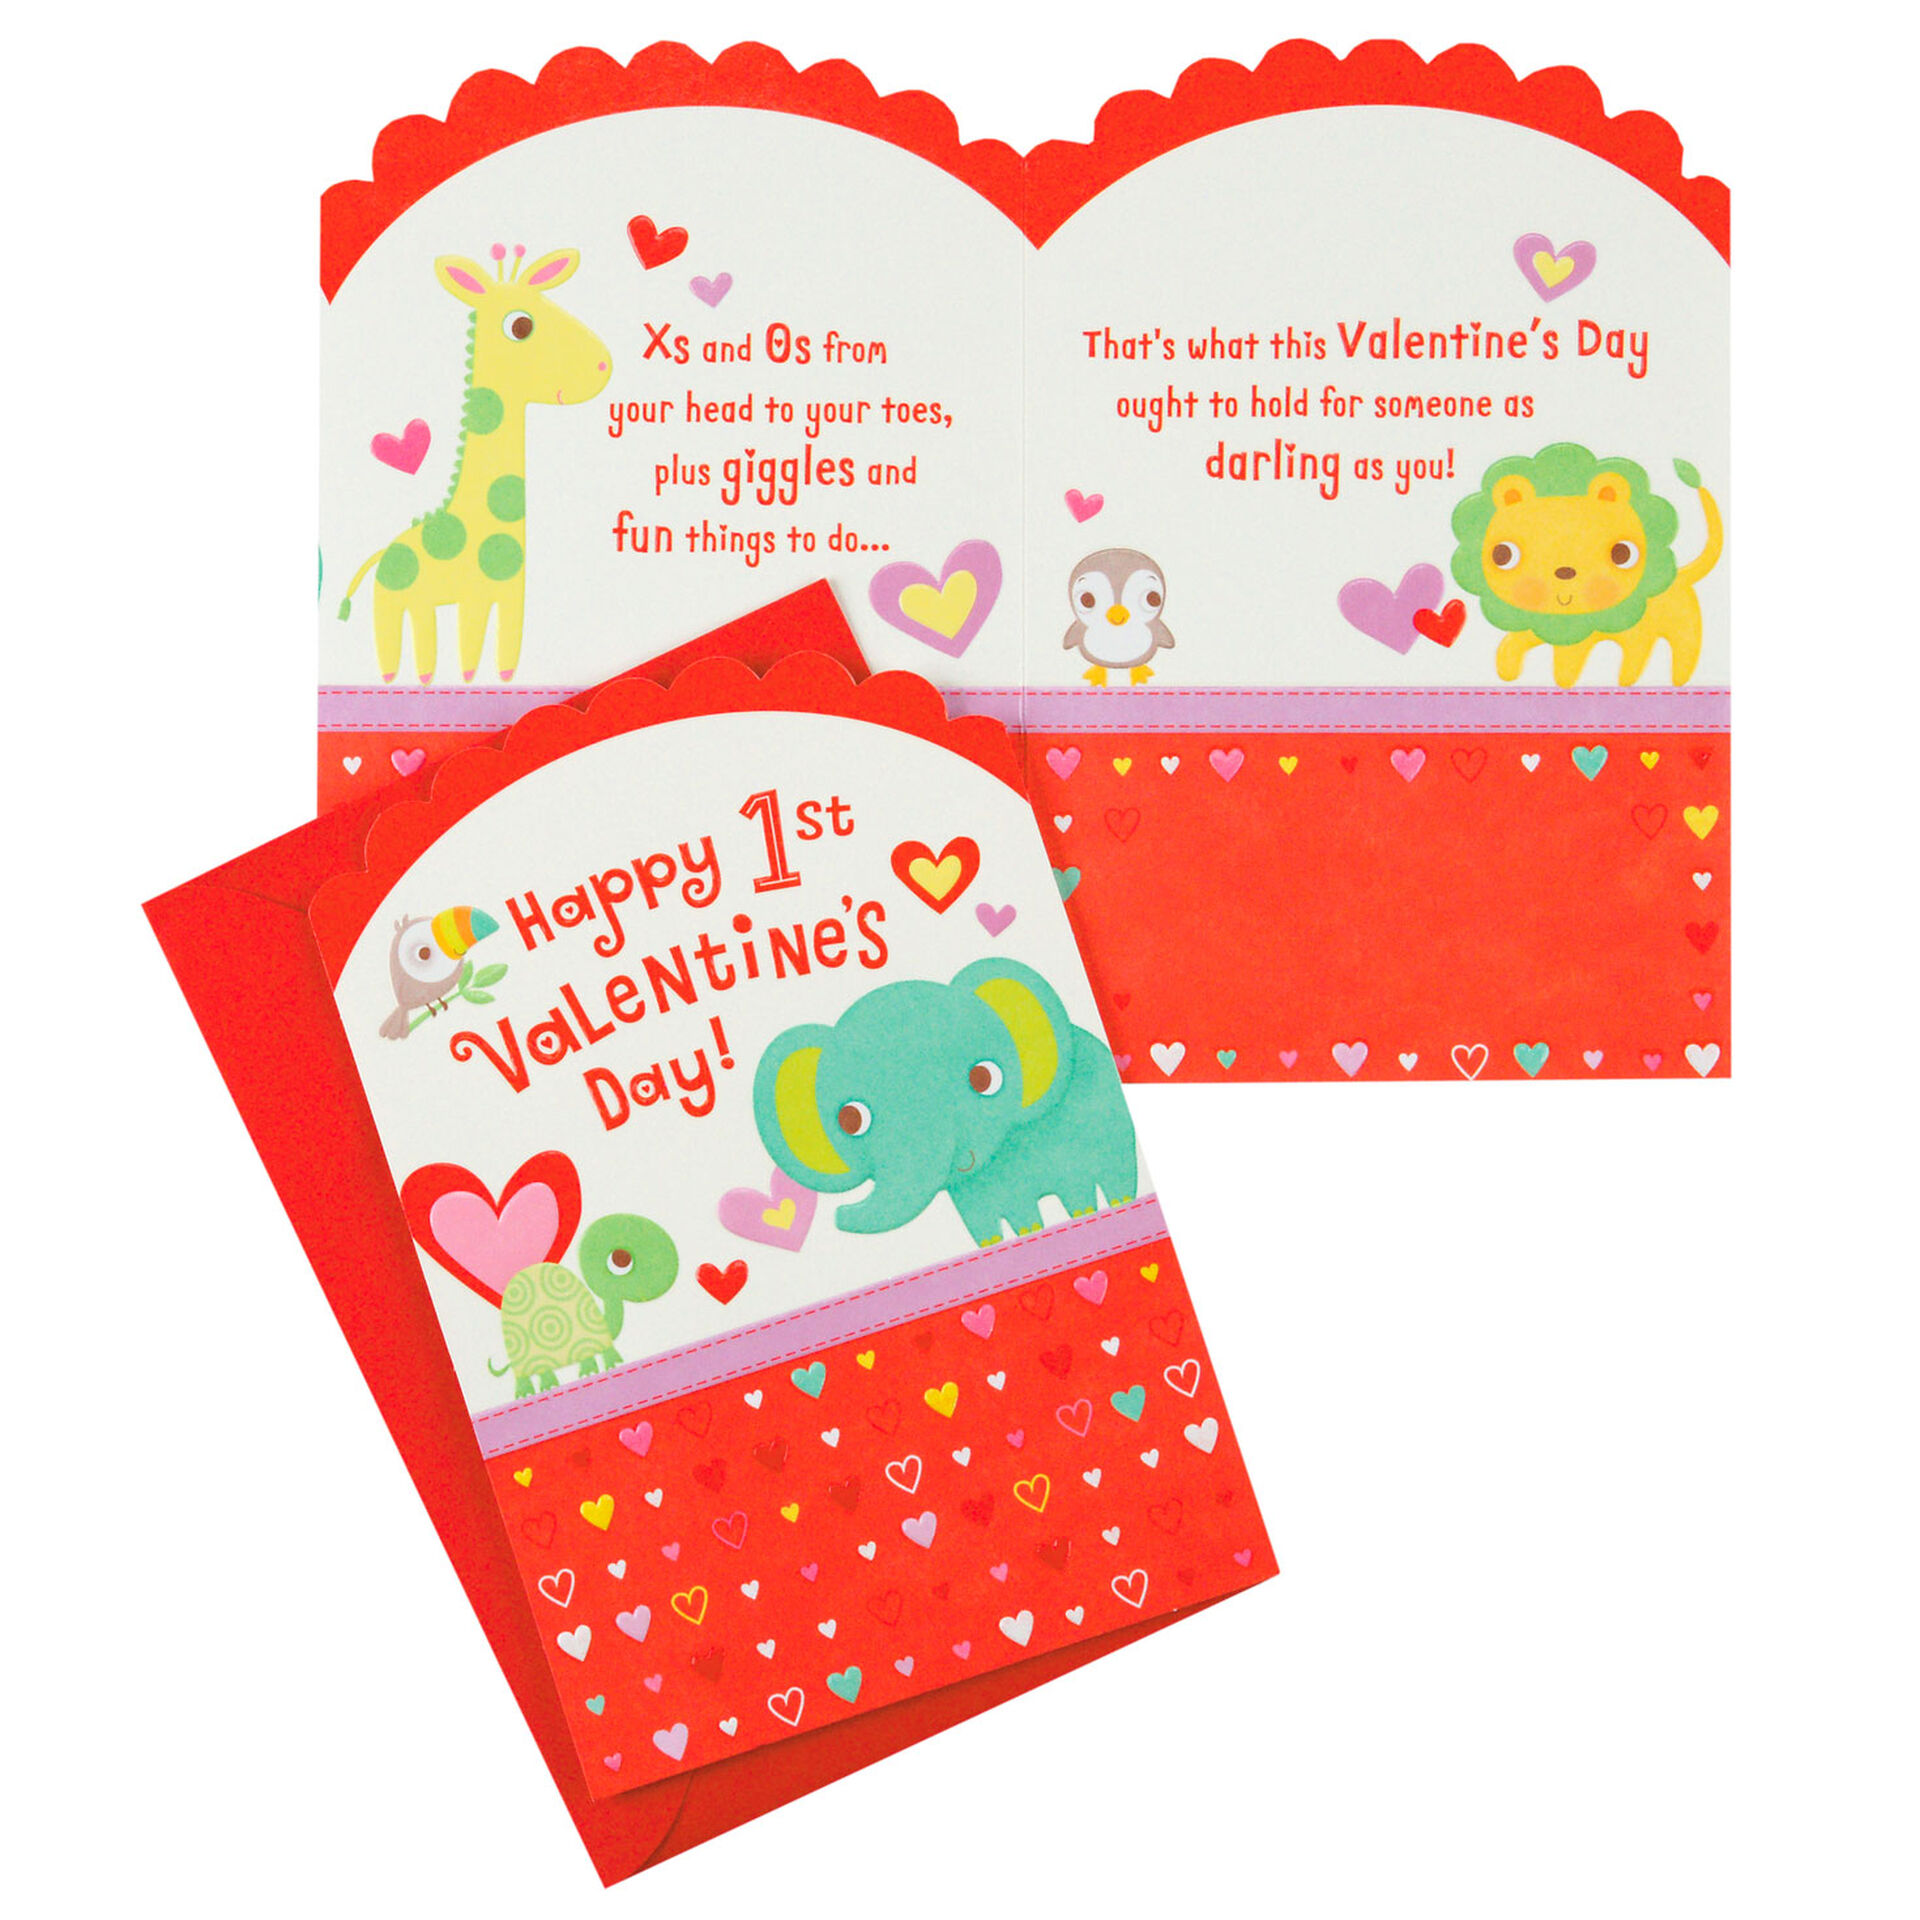 Assorted-Babys-First-Year-Holiday-Cards-for-Baby_1499RZC1011_02